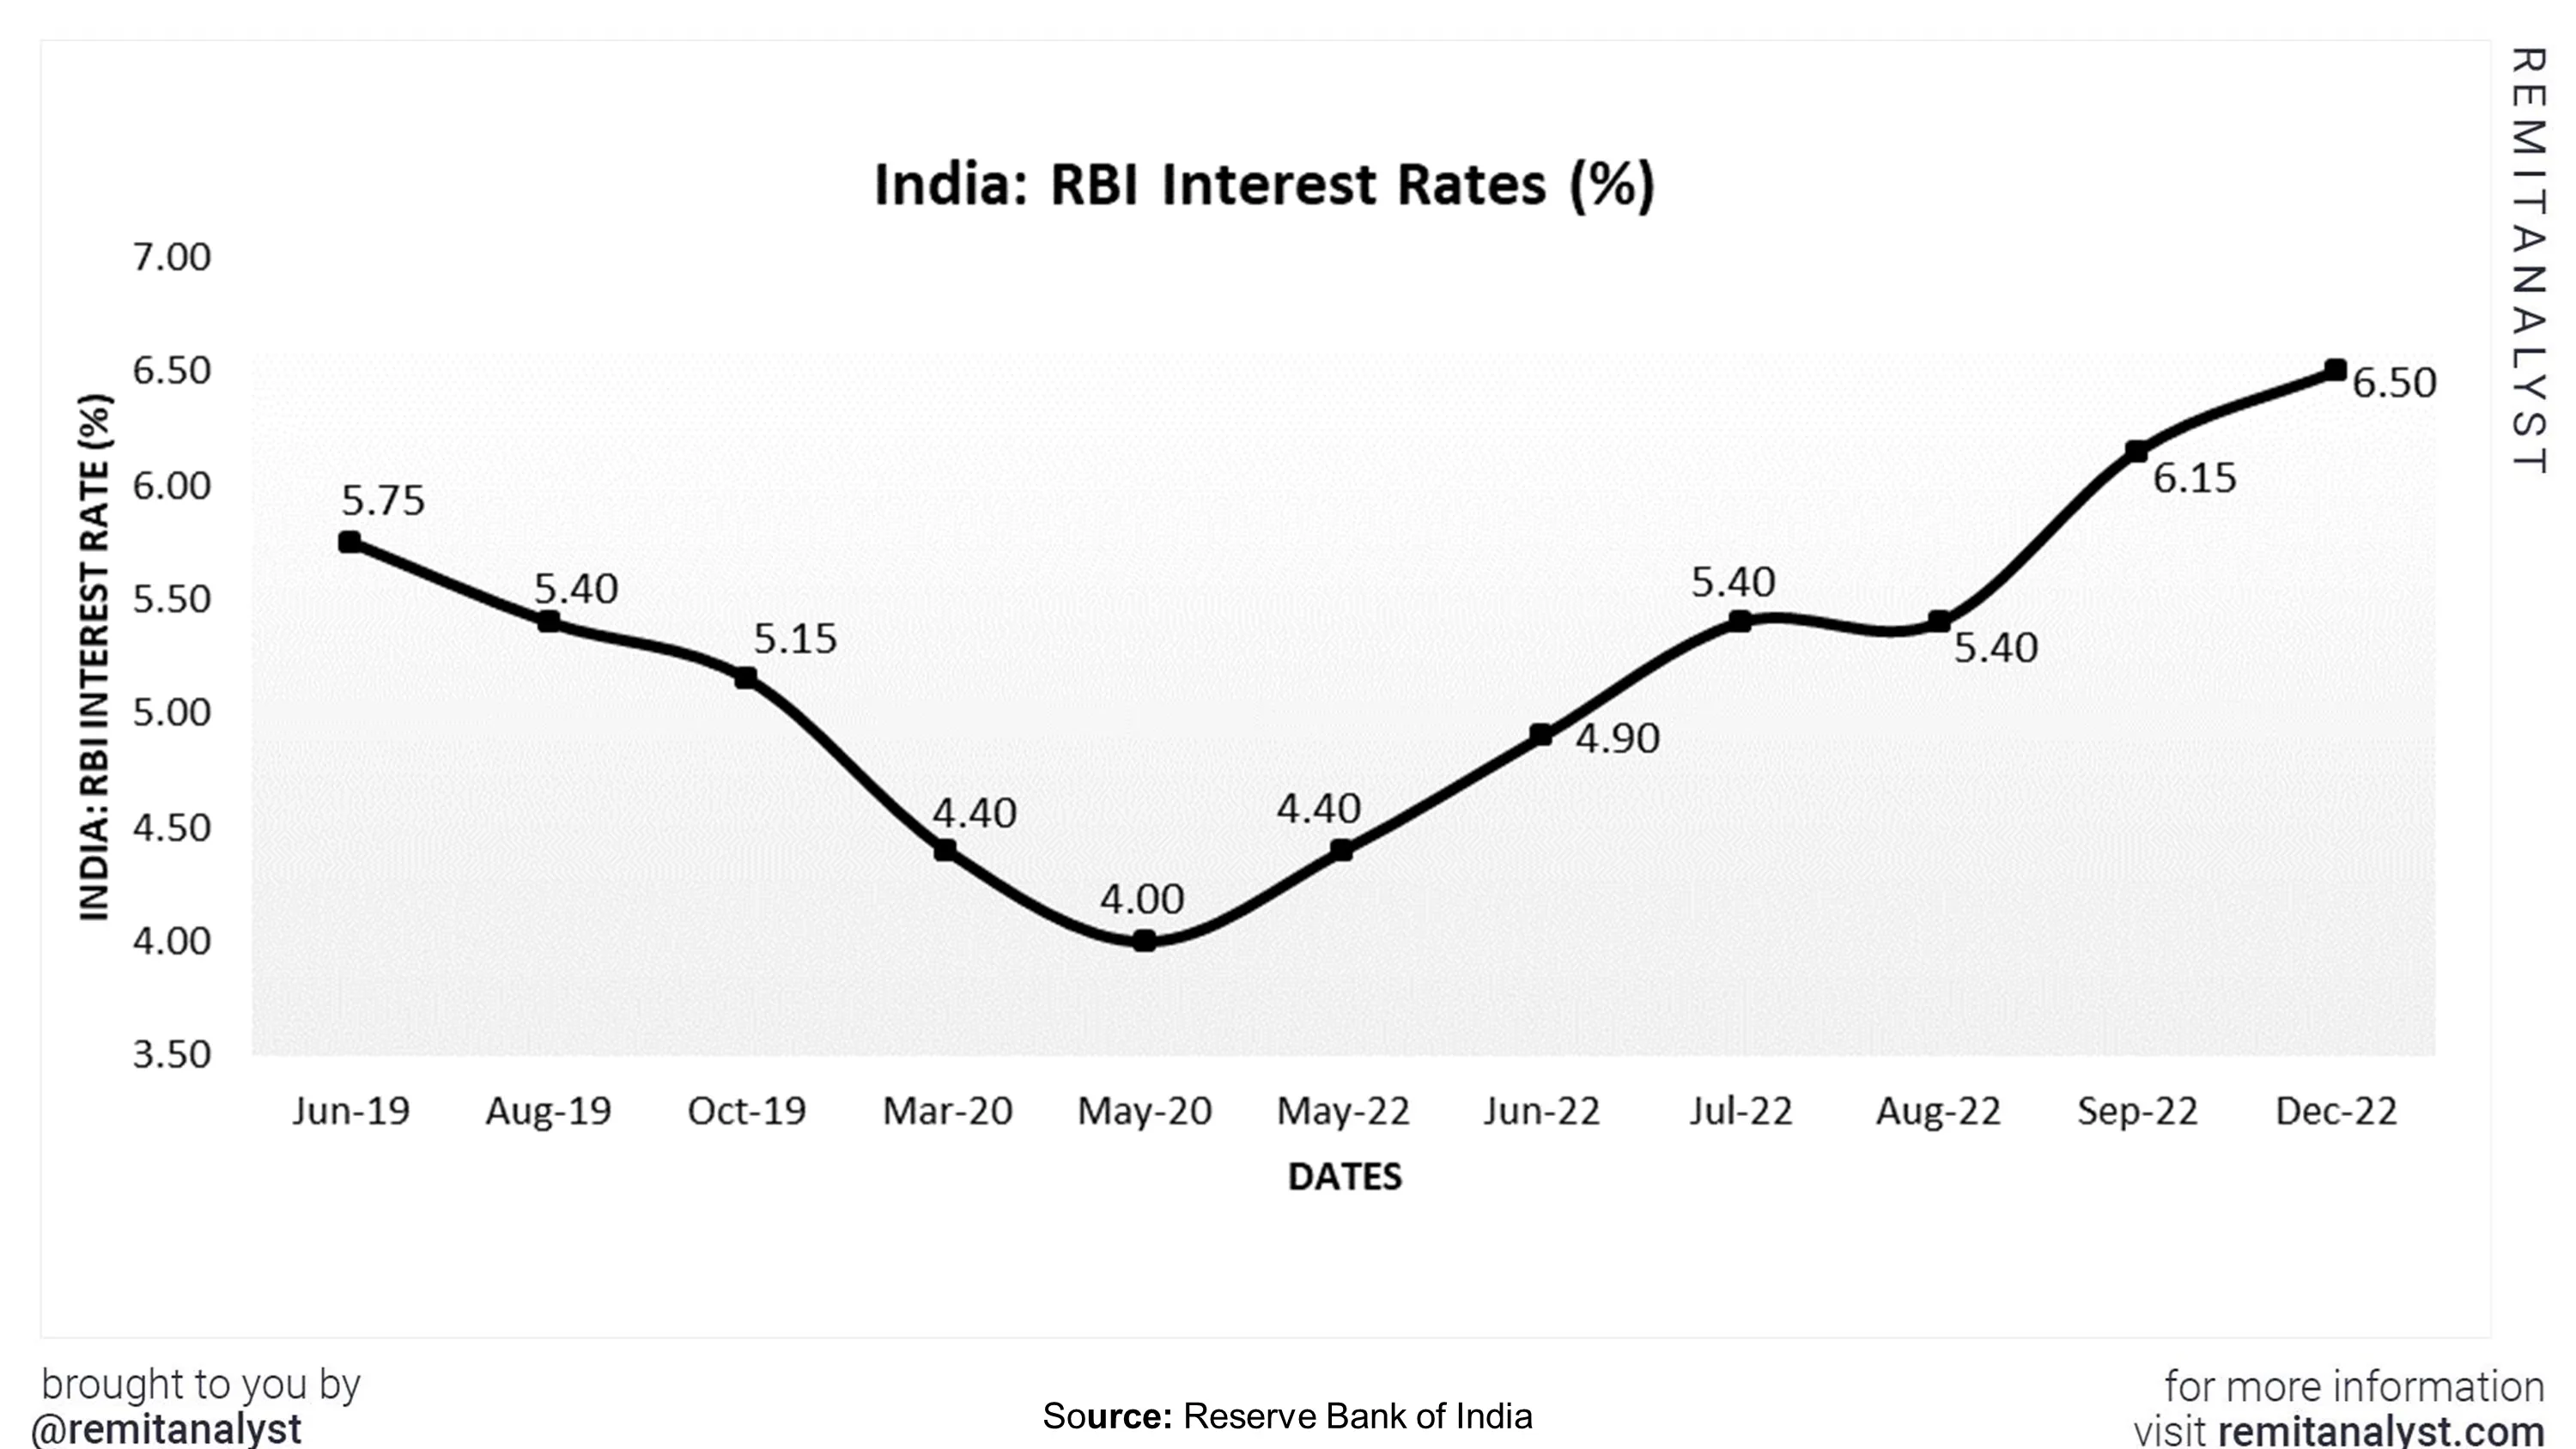 interest-rates-in-india-from-jun-2019-to-dec-2022